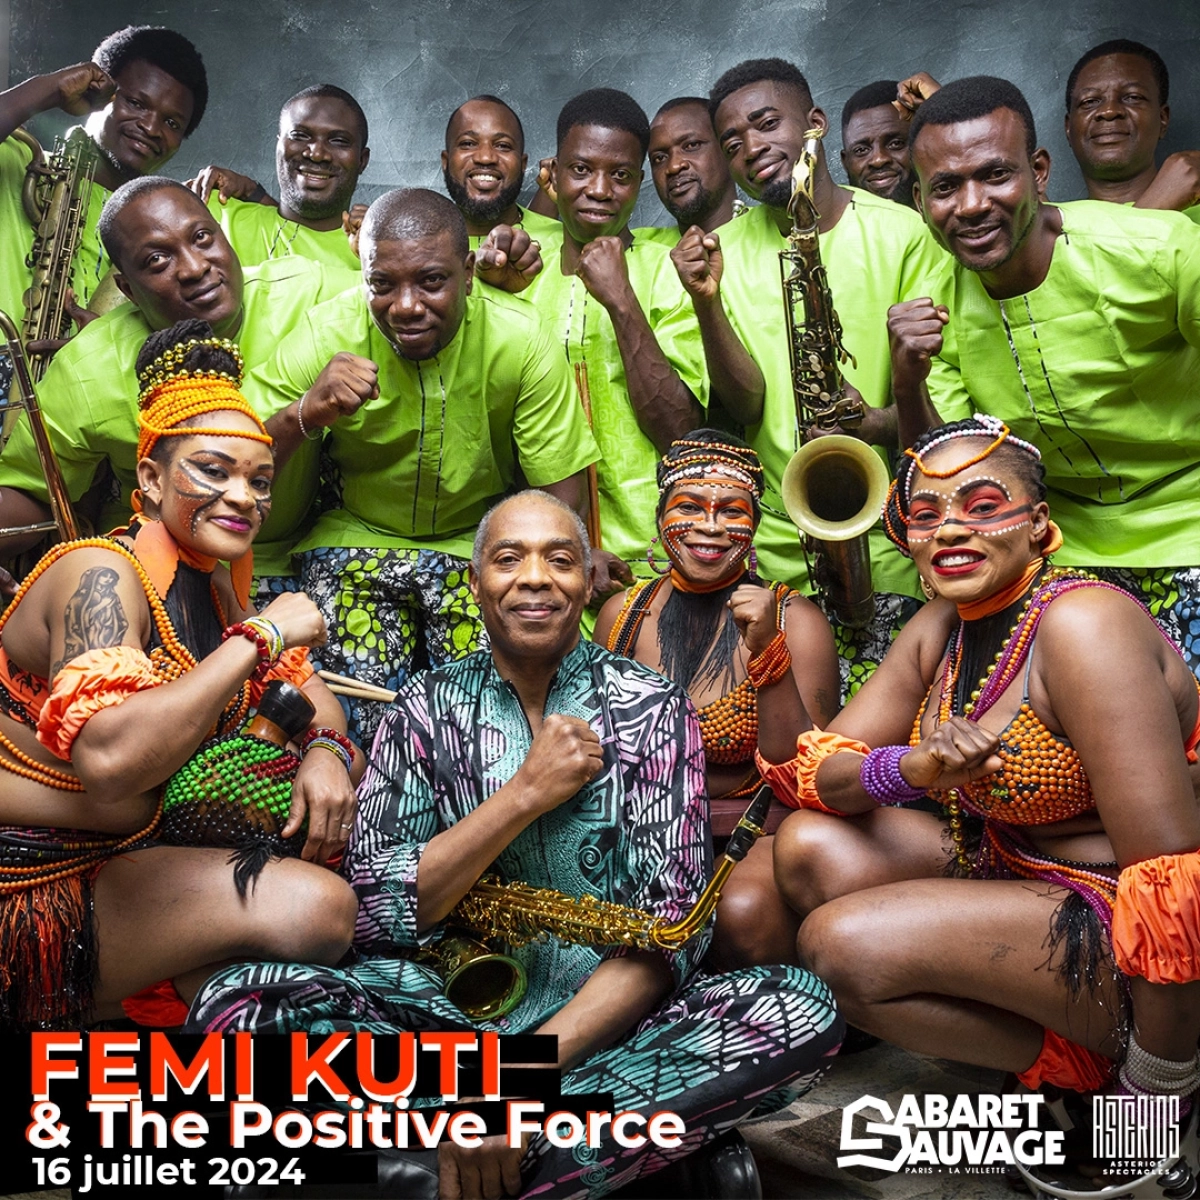 Femi Kuti and The Positive Force at Cabaret Sauvage Tickets